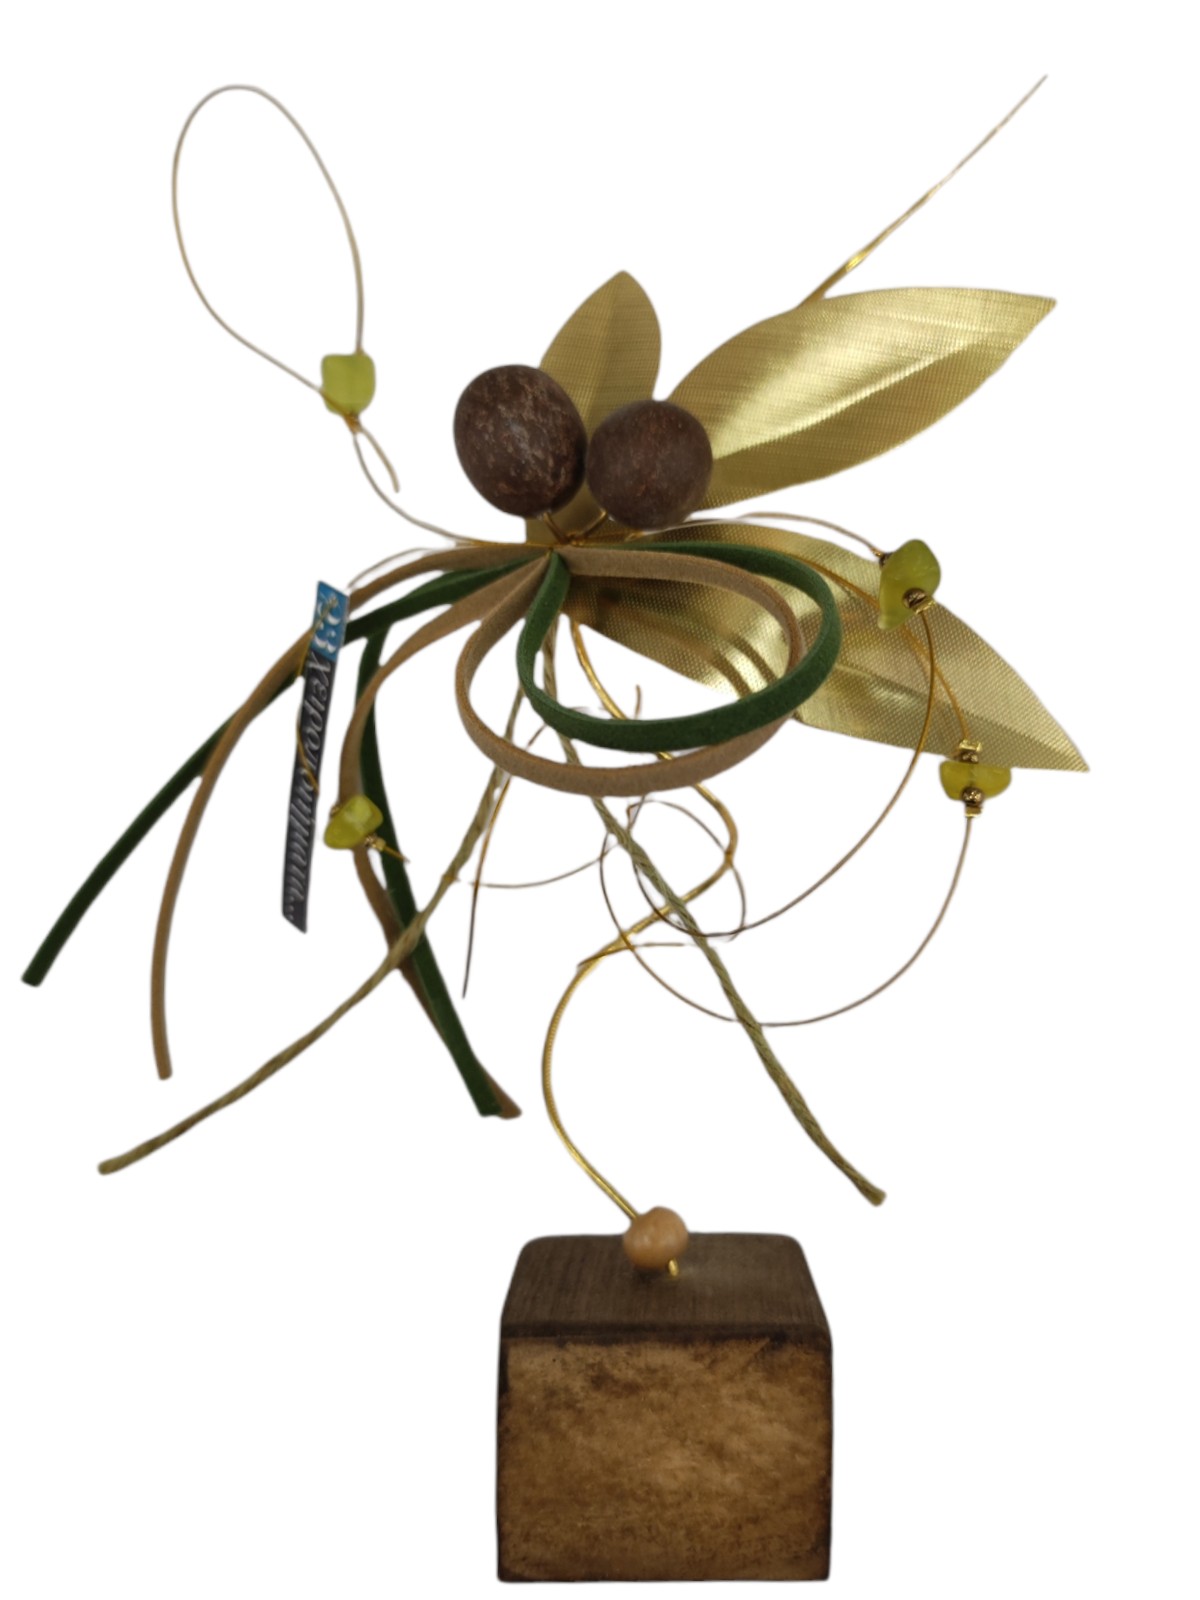 Bronze decorative olive branch on a wooden base